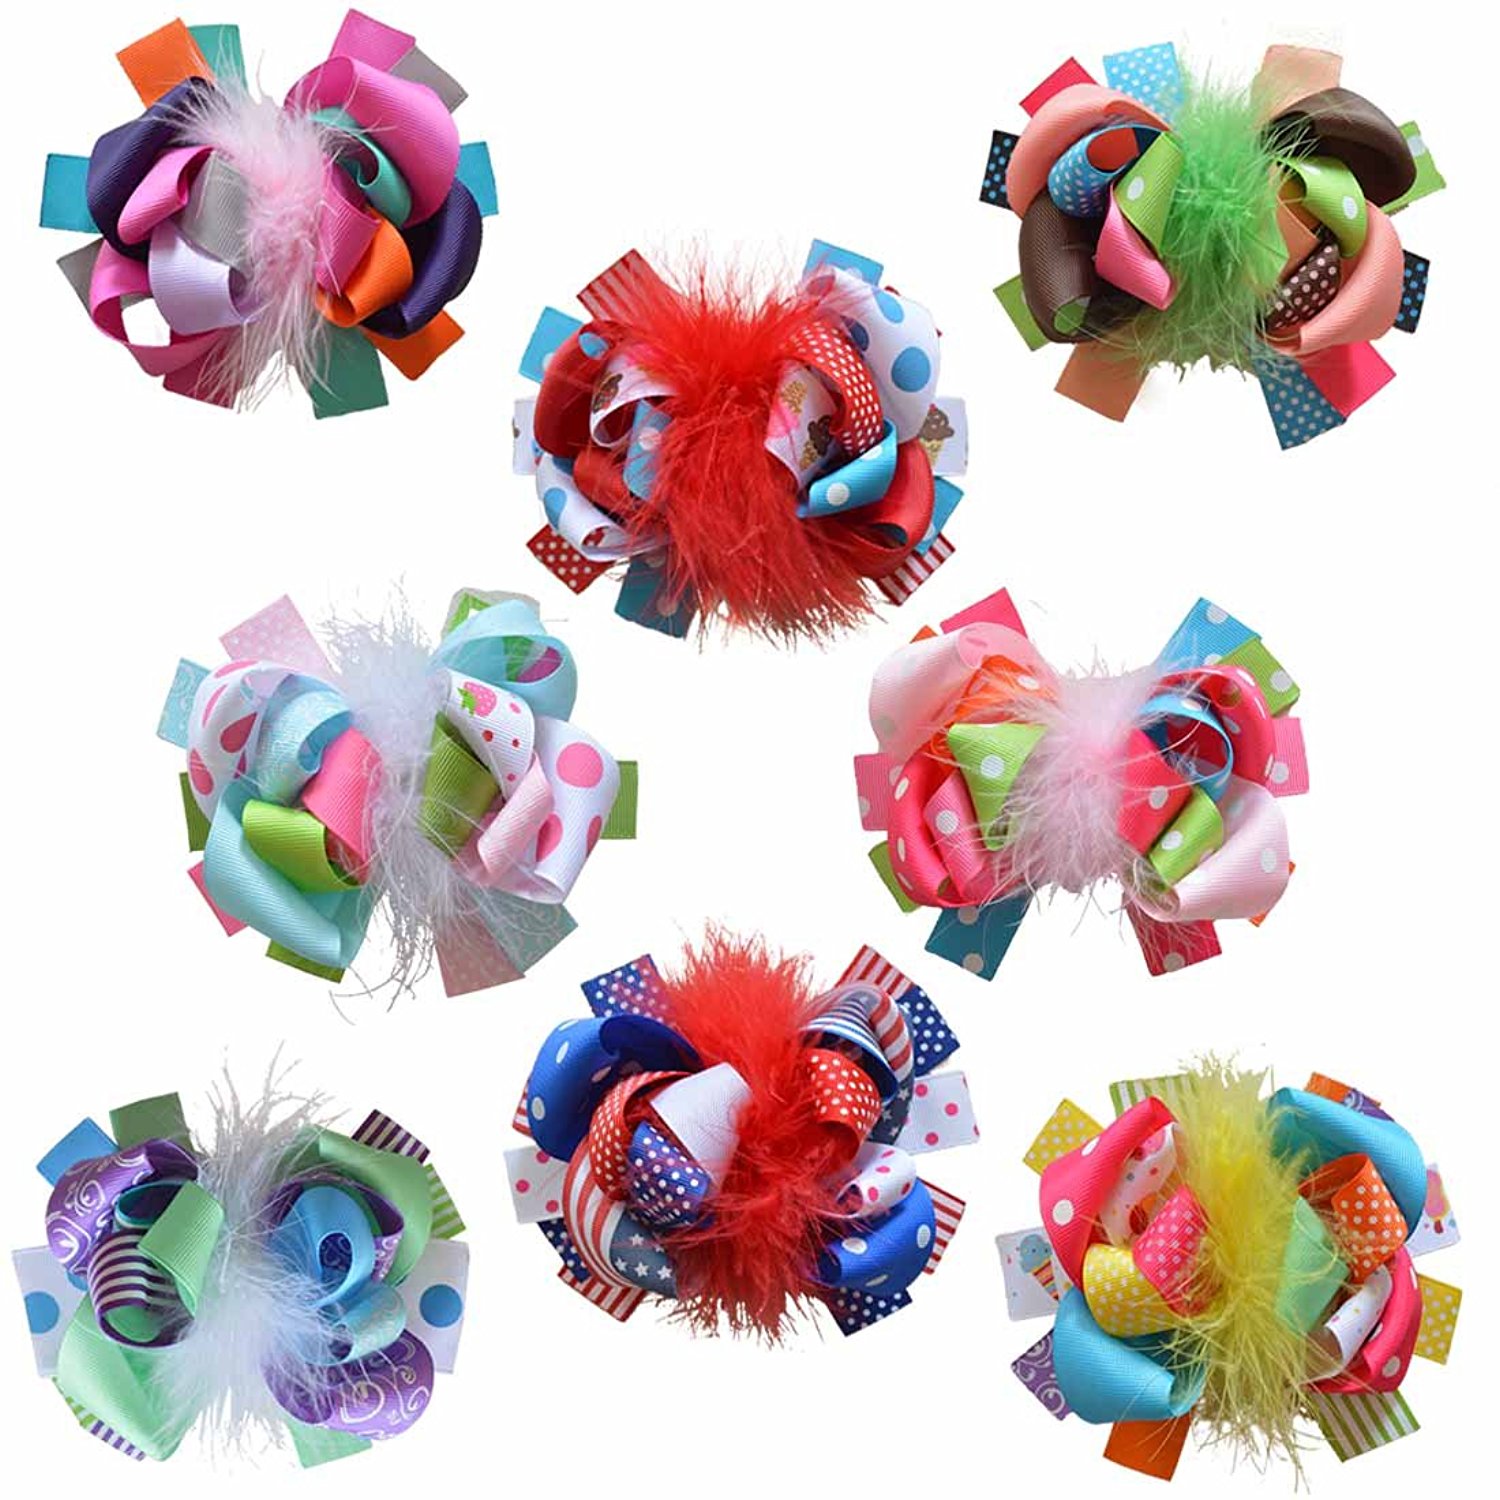 ShoppingOneDay on Twitter " Beautiful Feather hair bow. Buy some for